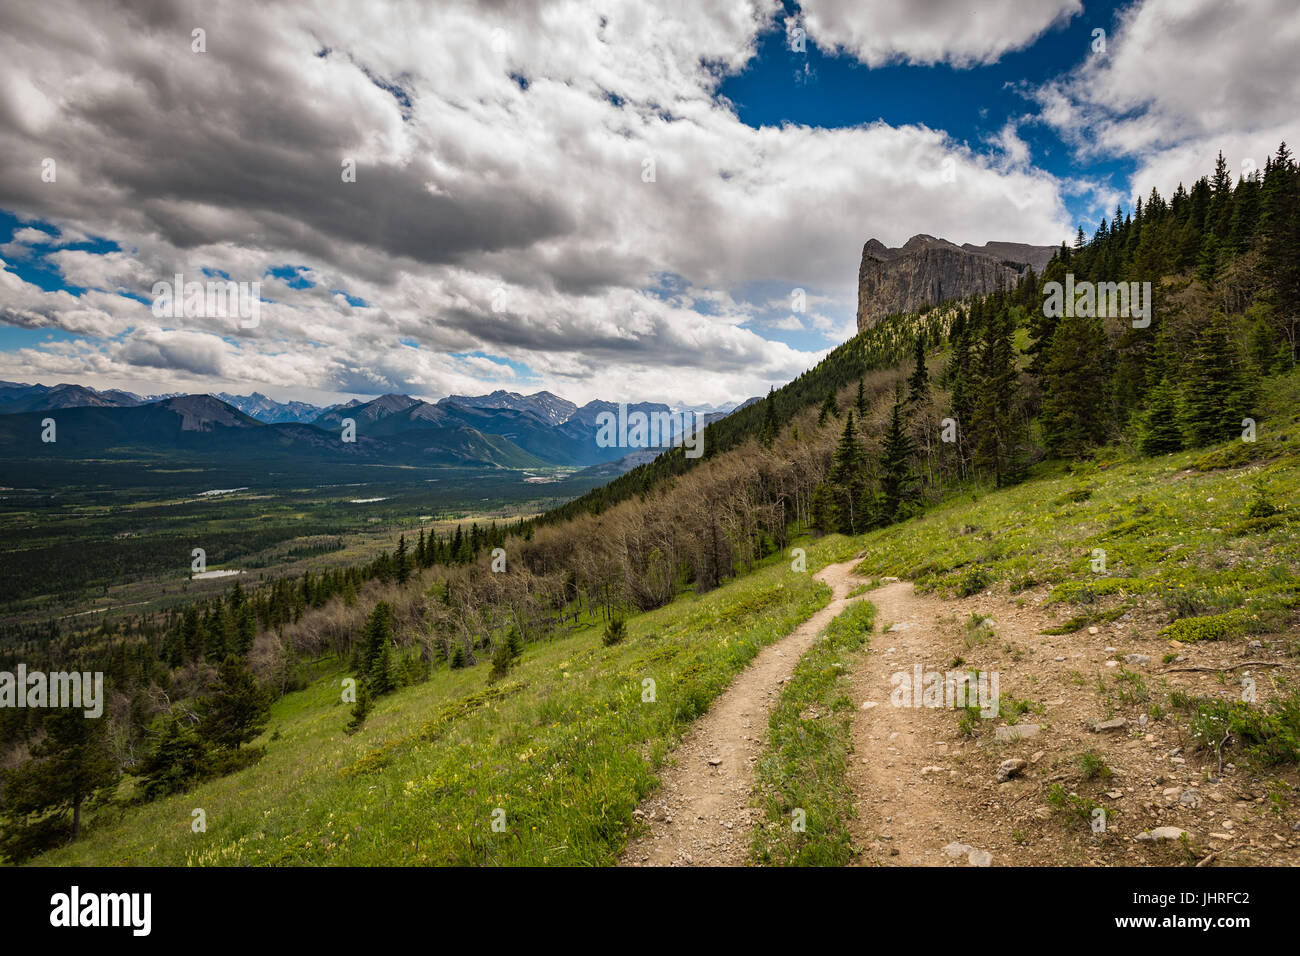 Hiking views from Mount John Laurie (Yamnuska), overlooking the foothills and prairies of Alberta Canada Stock Photo